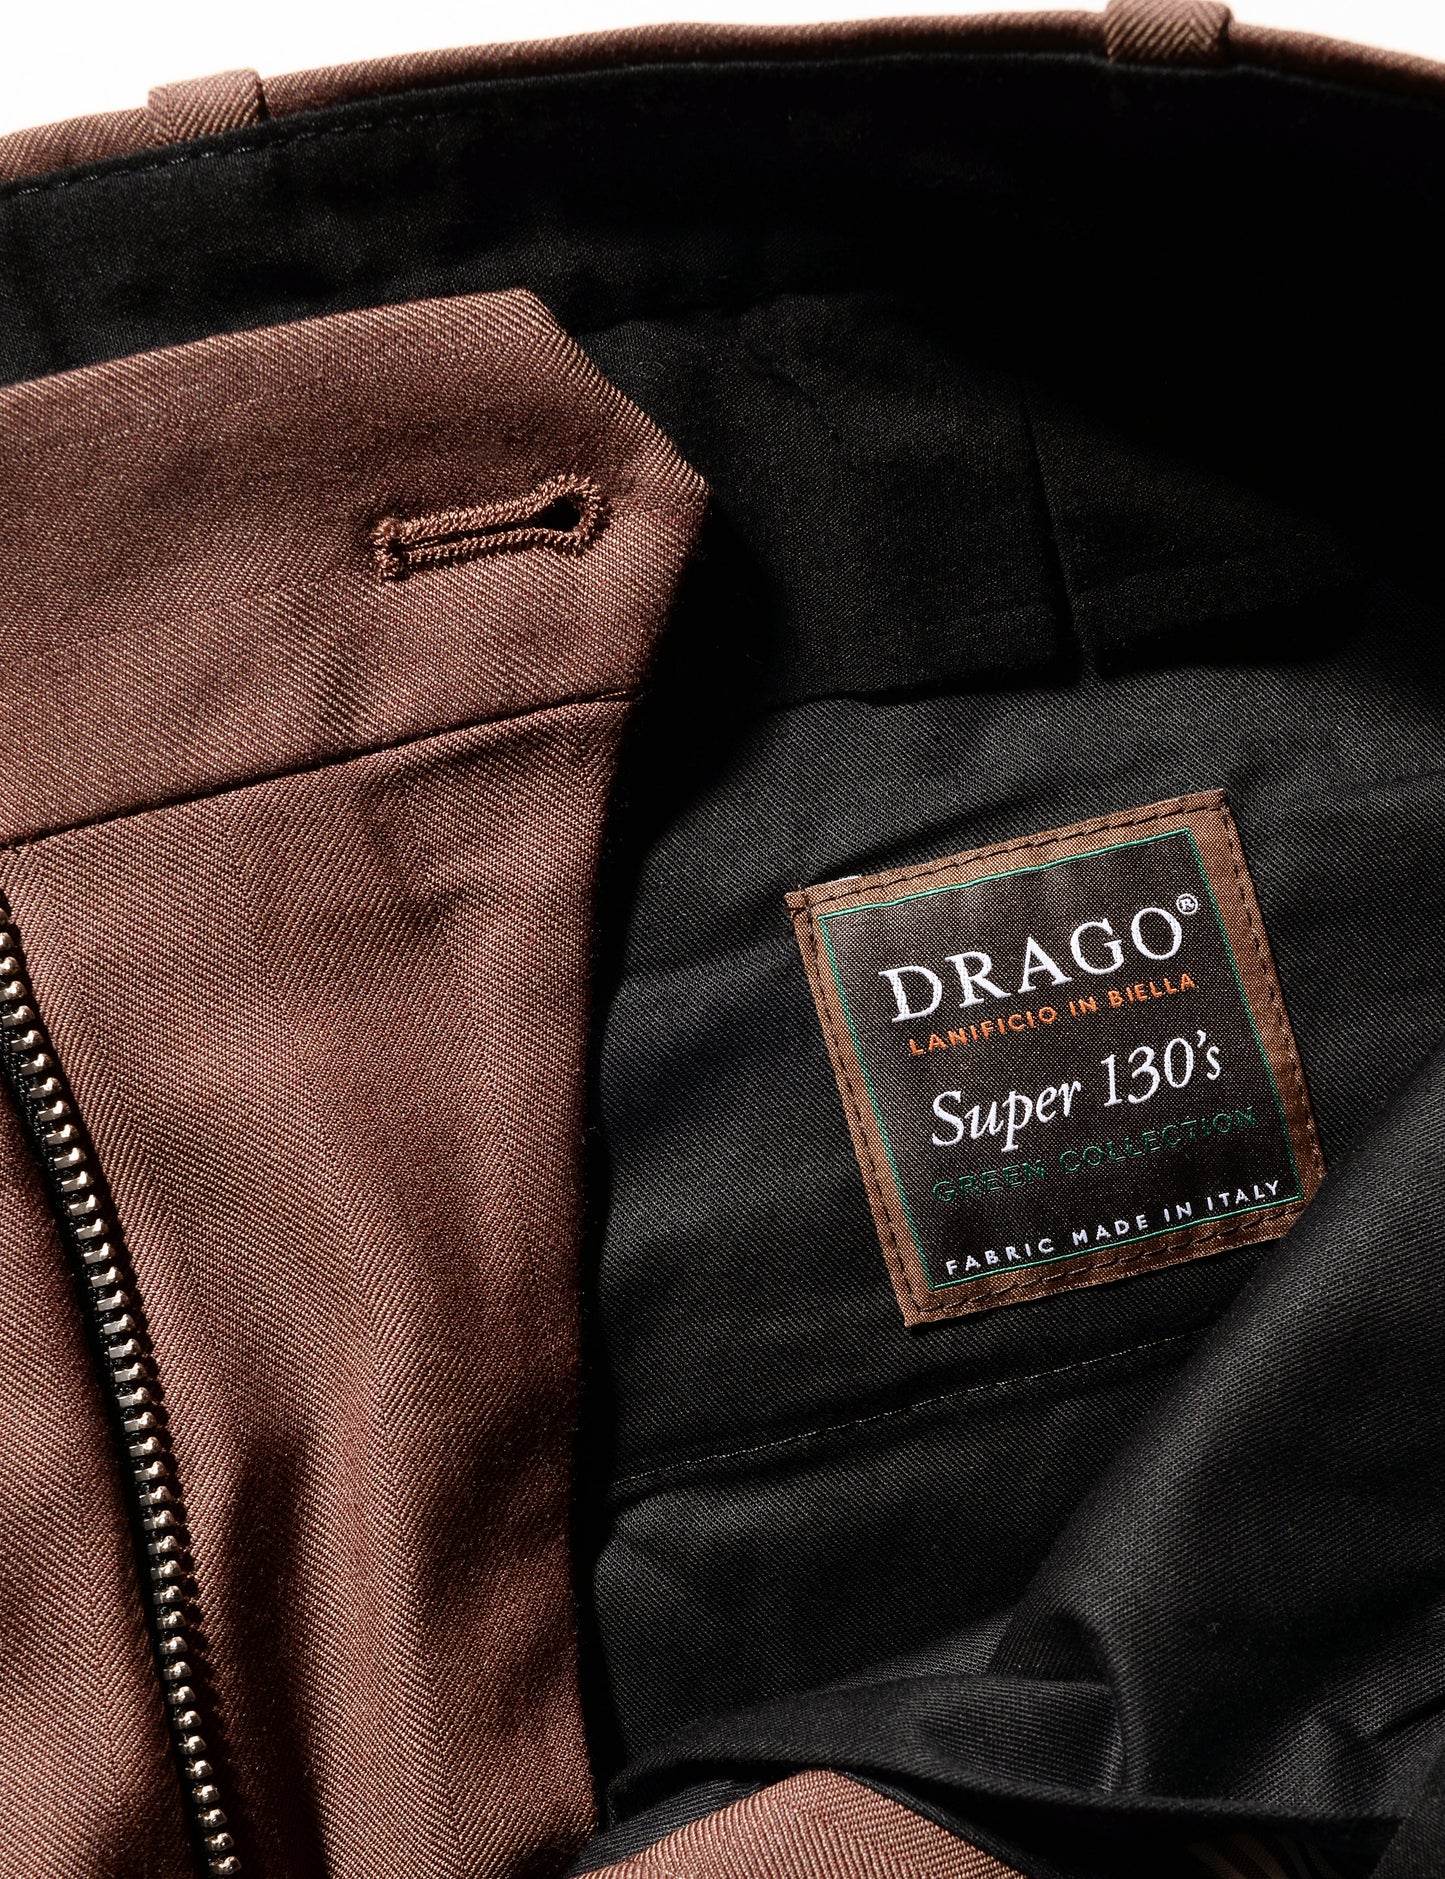 Detail of BKT50 Tailored Trousers in Wool Herringbone - Sepia showing interior Drago label 